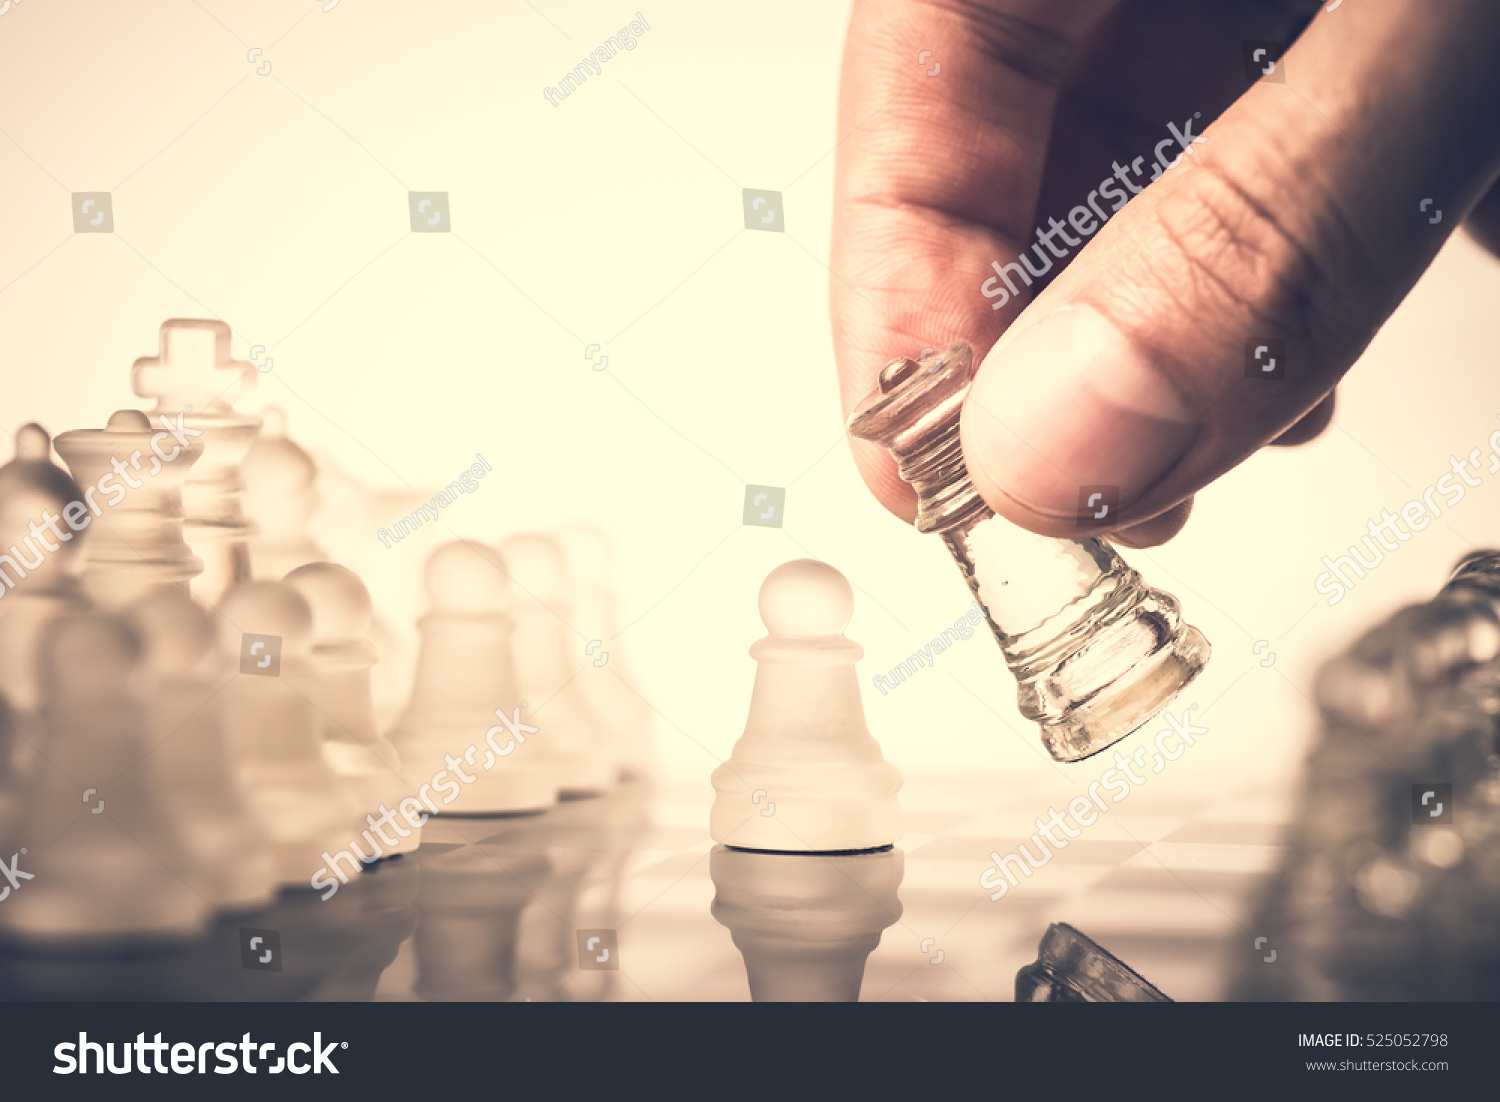 Chess. Strategy game. Competition success play. Intelligence challenge concept. King move on chessboard. White and black pawn on board. Business leadership. Leisure sport. #525052798